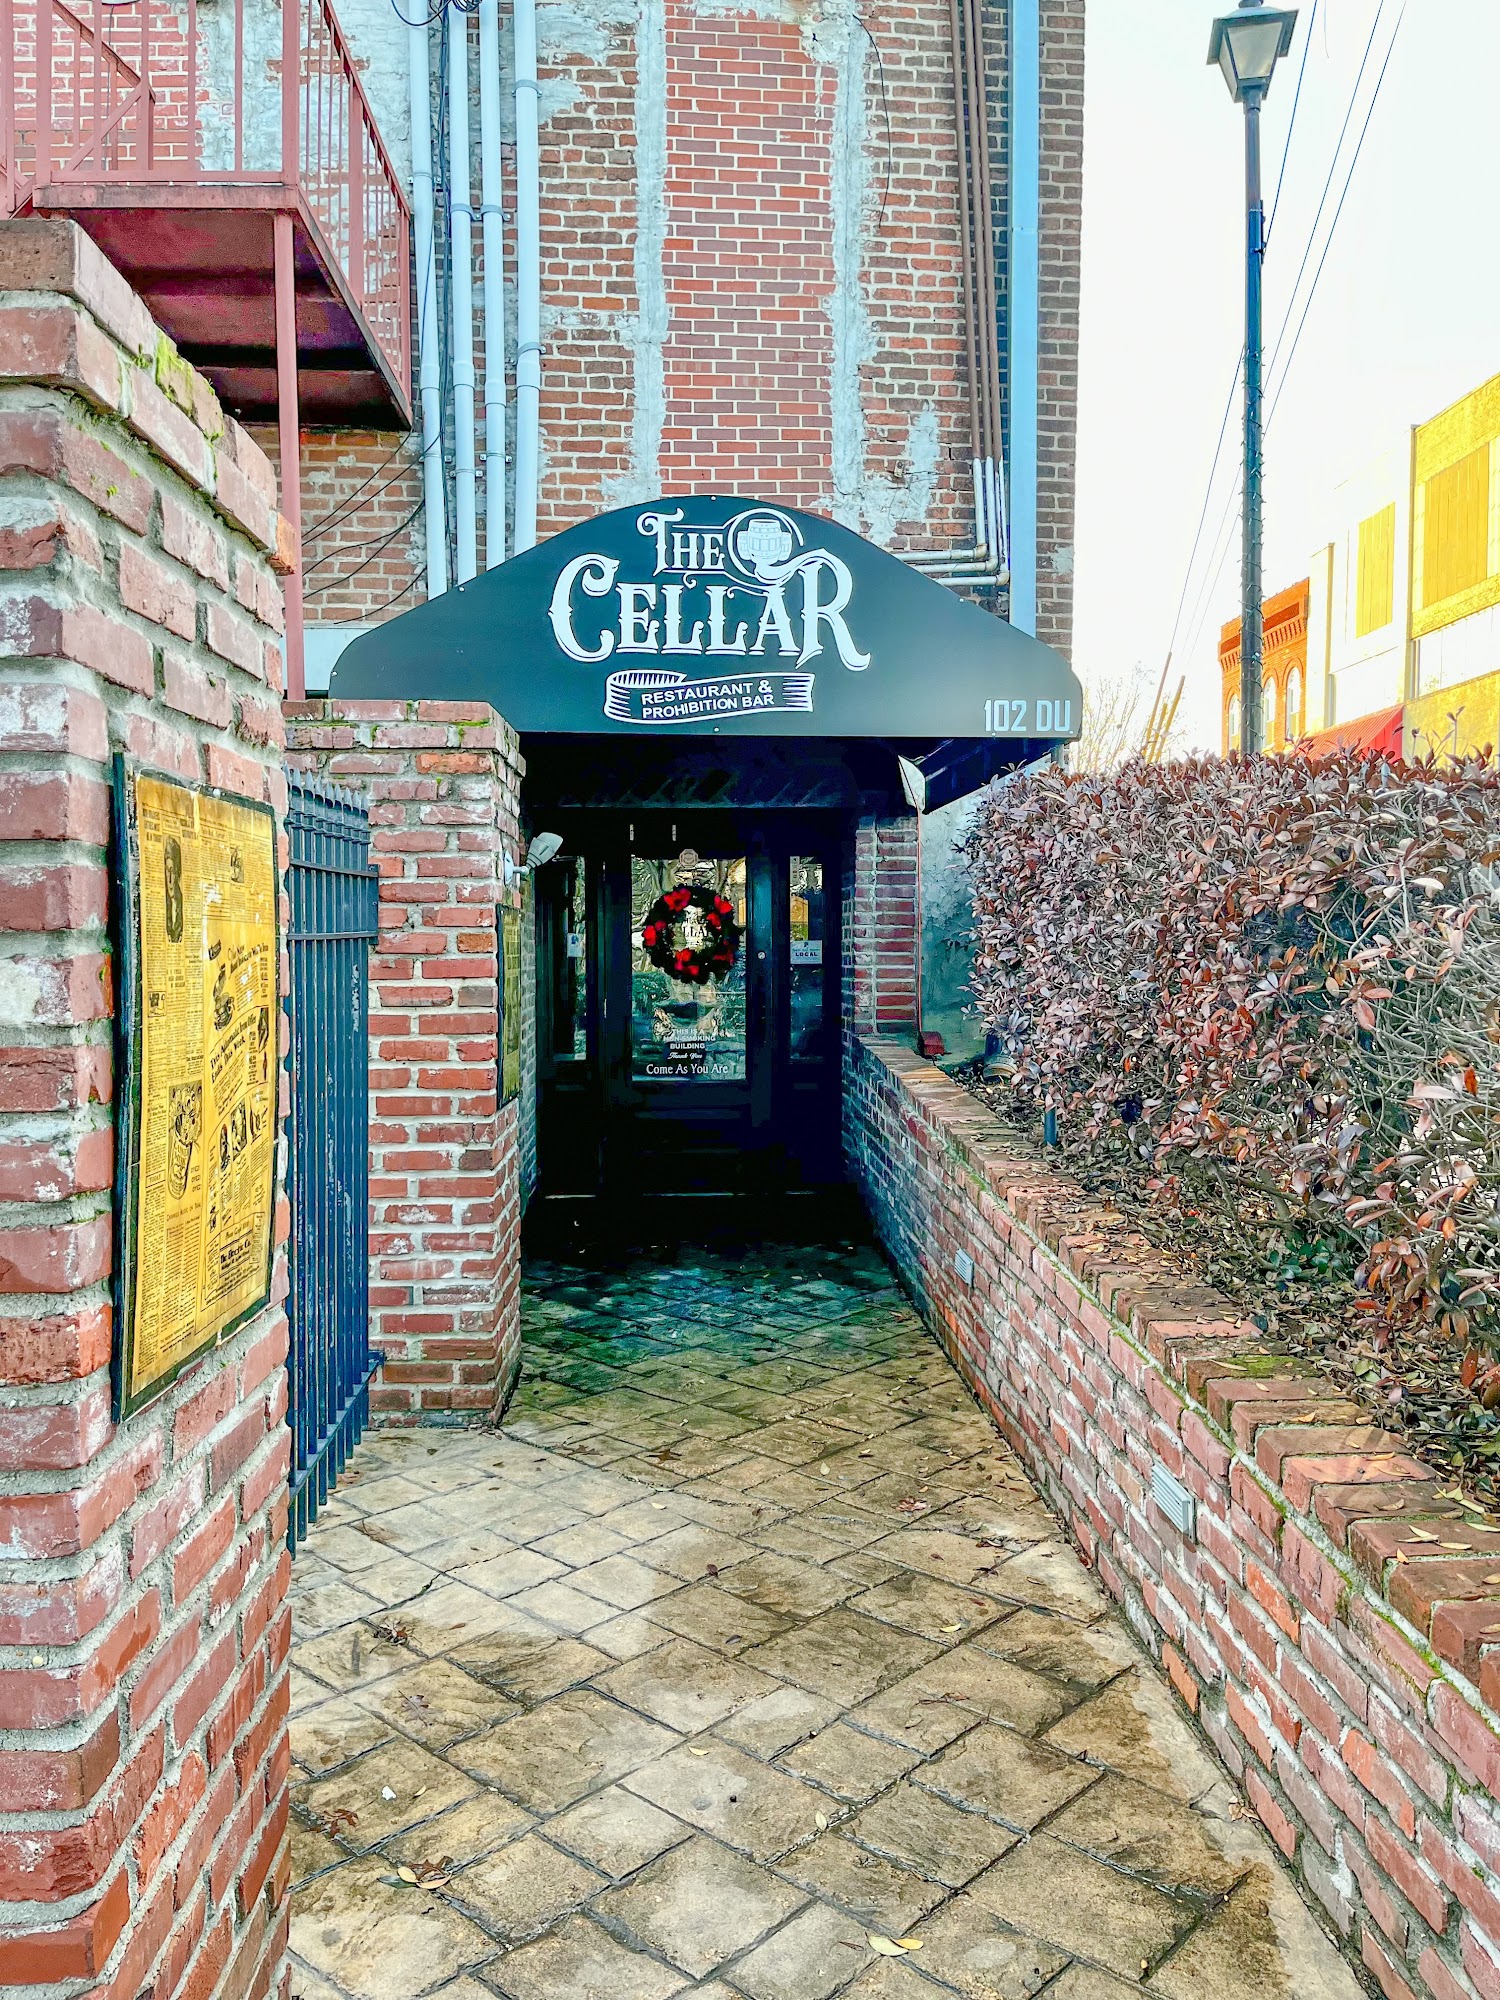 The Cellar Restaurant and Prohibition Bar